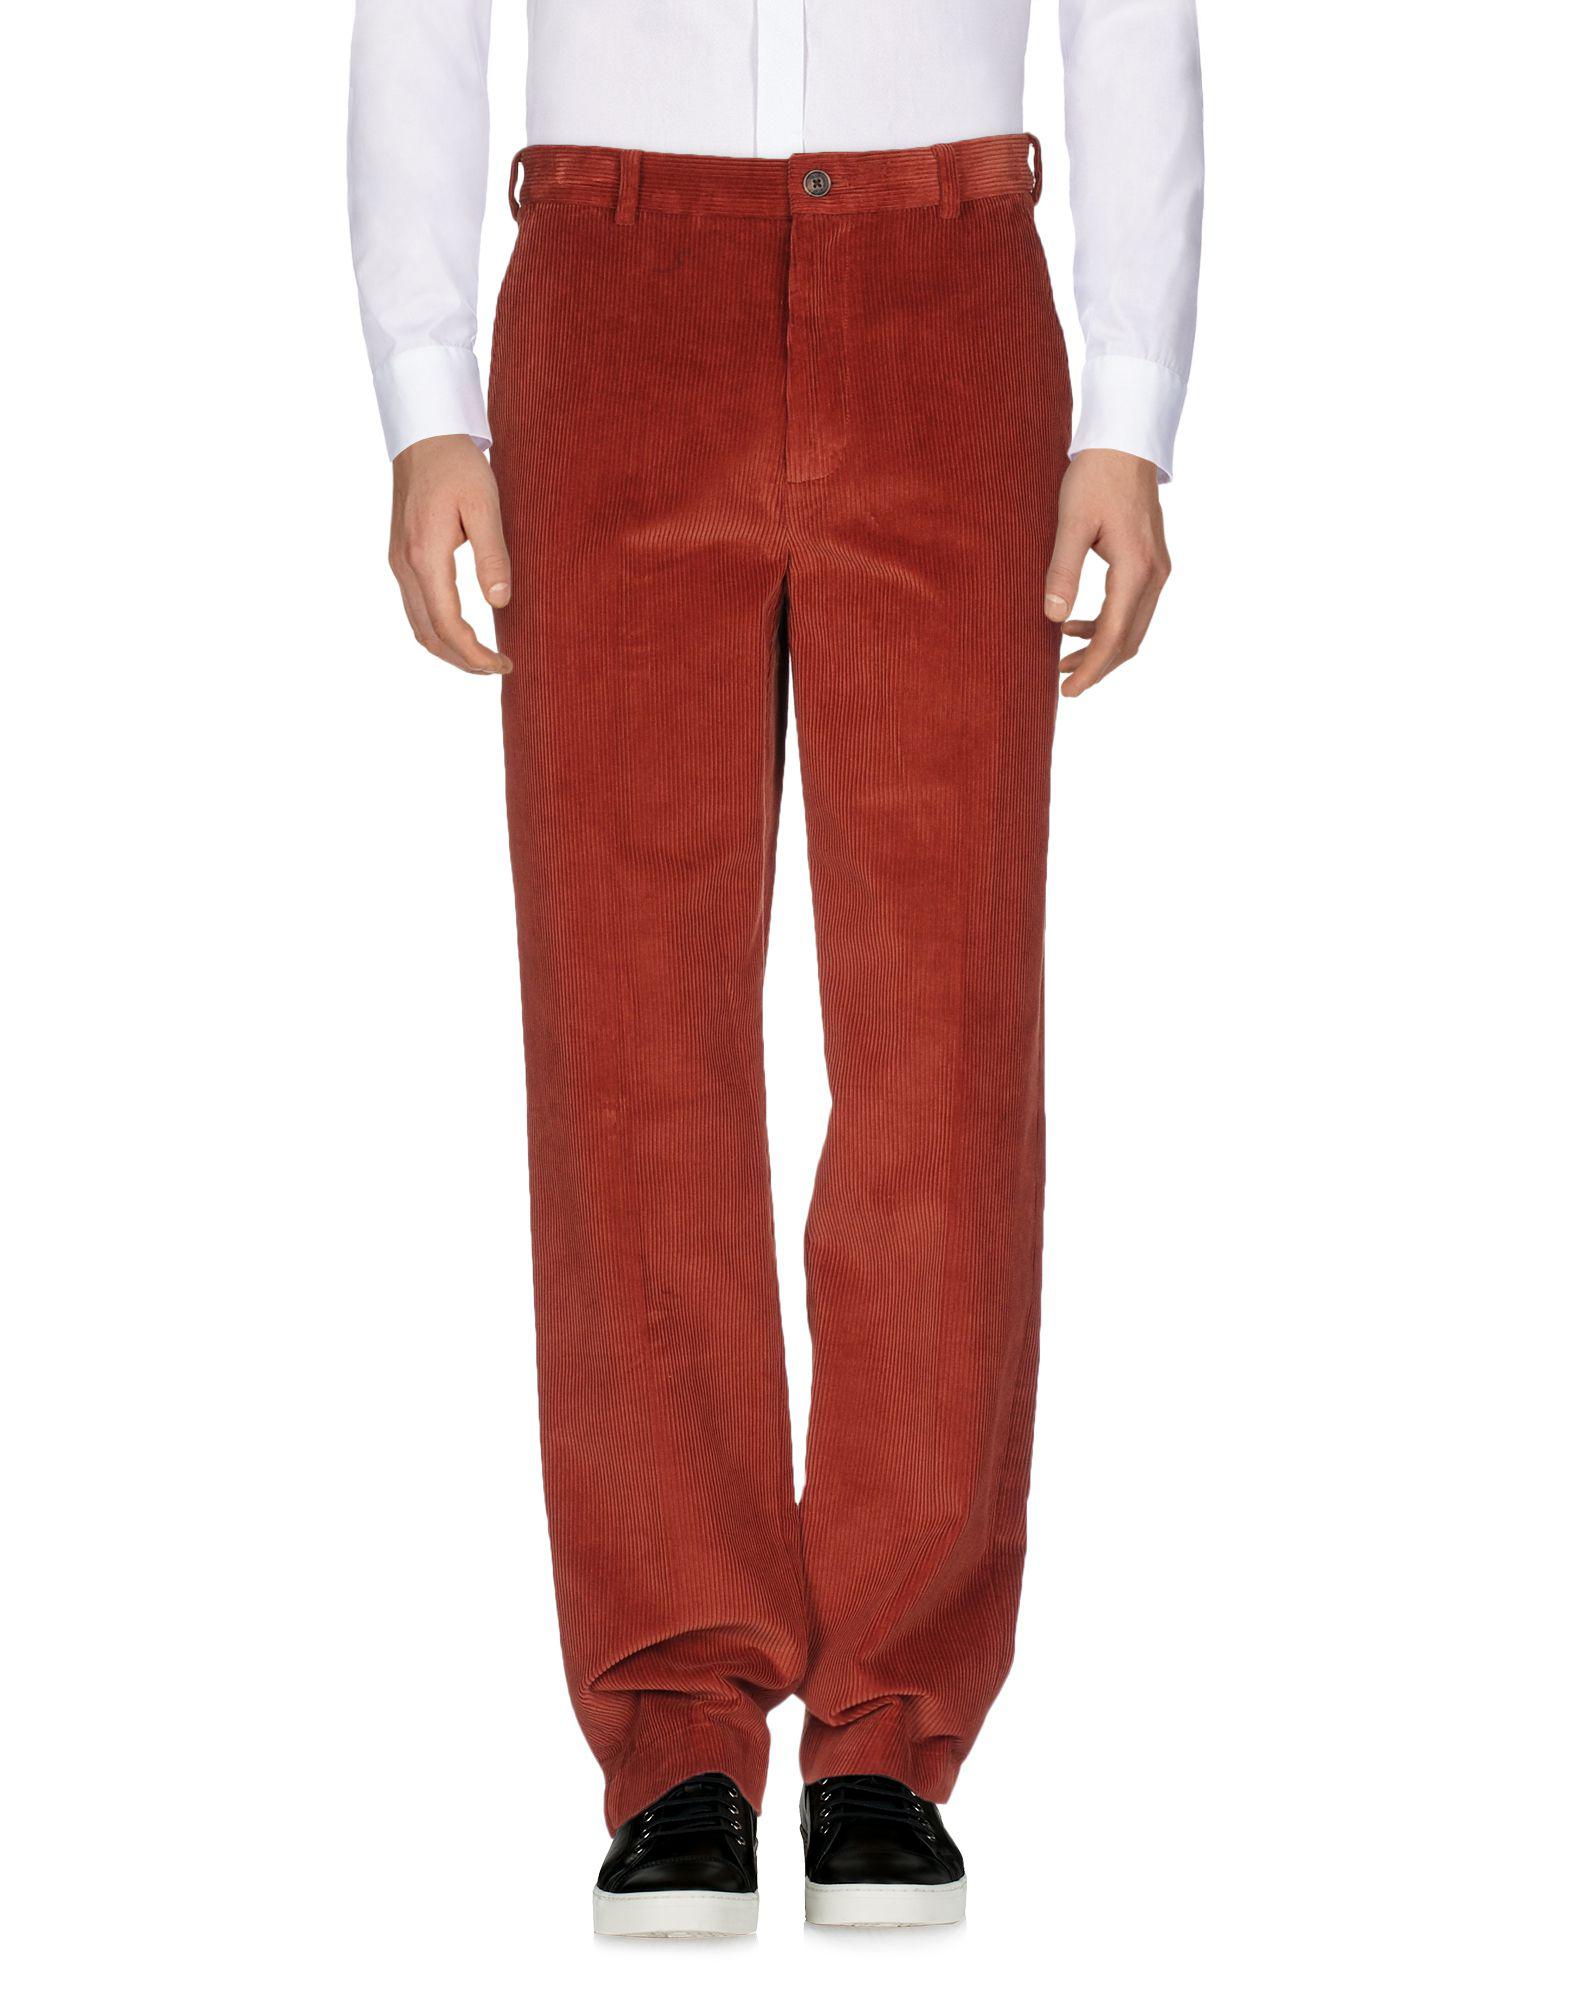 Brooks Brothers Corduroy Casual Pants in Rust (Red) for Men - Lyst